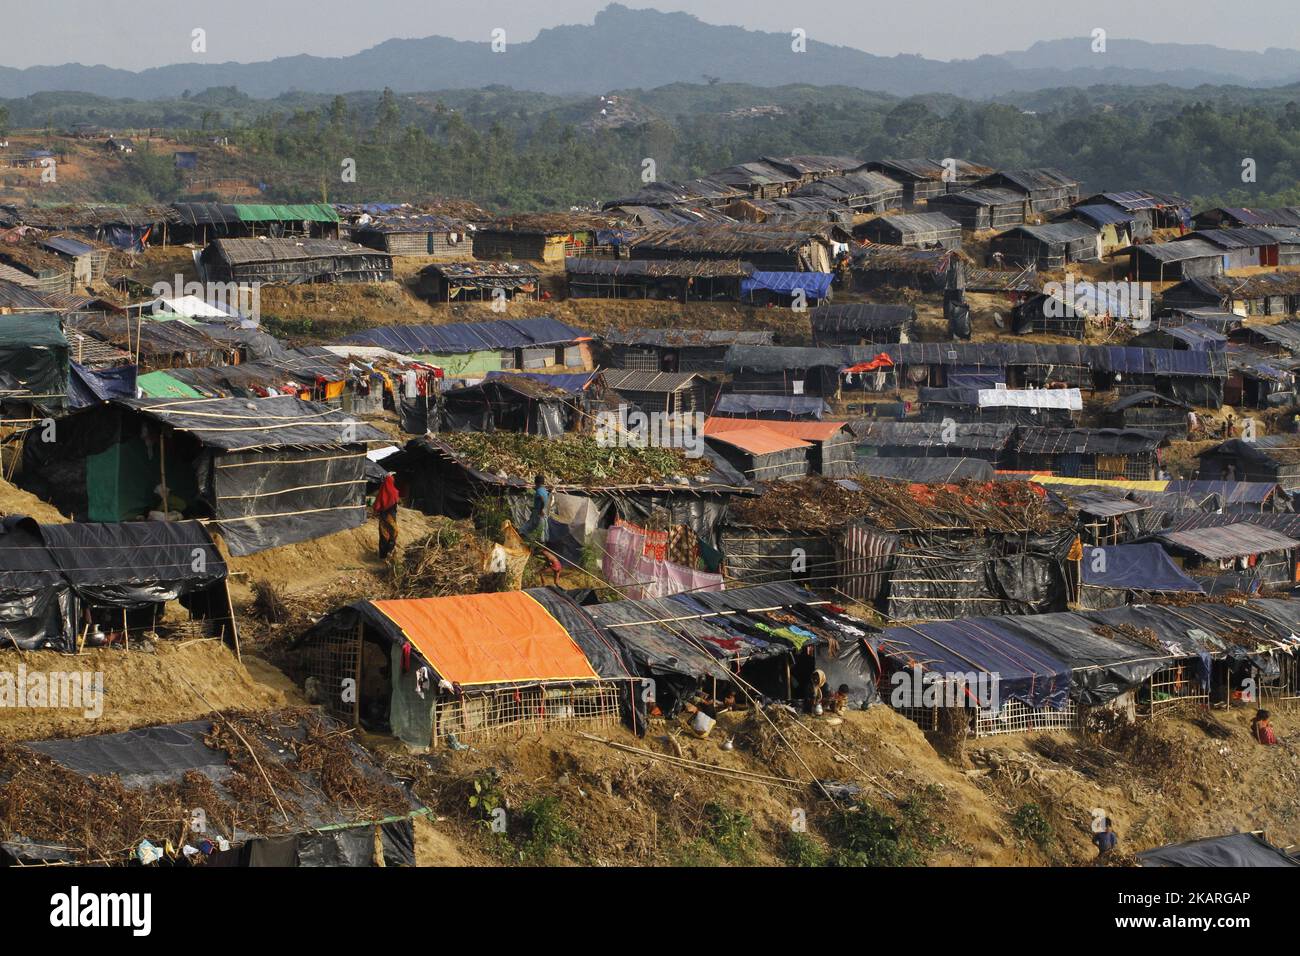 A view shows Rohingya refugees tents in Ukhiya, Bangladesh on September 26, 2017. More than 450,000 Rohingya Muslims have fled into Bangladesh, violence erupted in Myanmar's Rakhine state since August 25. (Photo by Rehman Asad/NurPhoto) Stock Photo